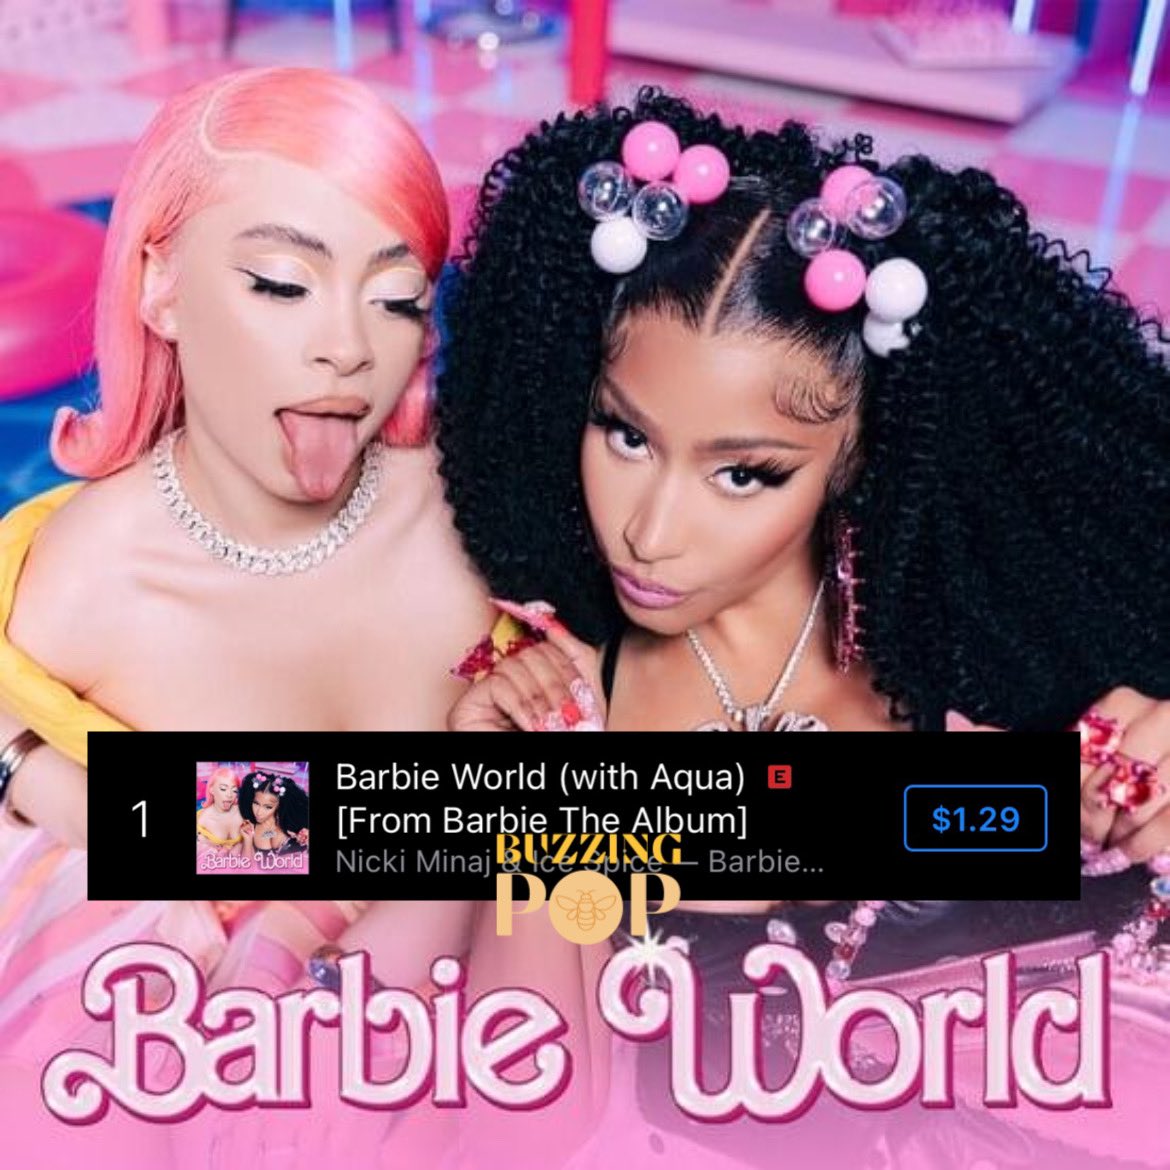 “Barbie World” by Nicki Minaj, Ice Spice and Aqua is now the #1 song on US iTunes.